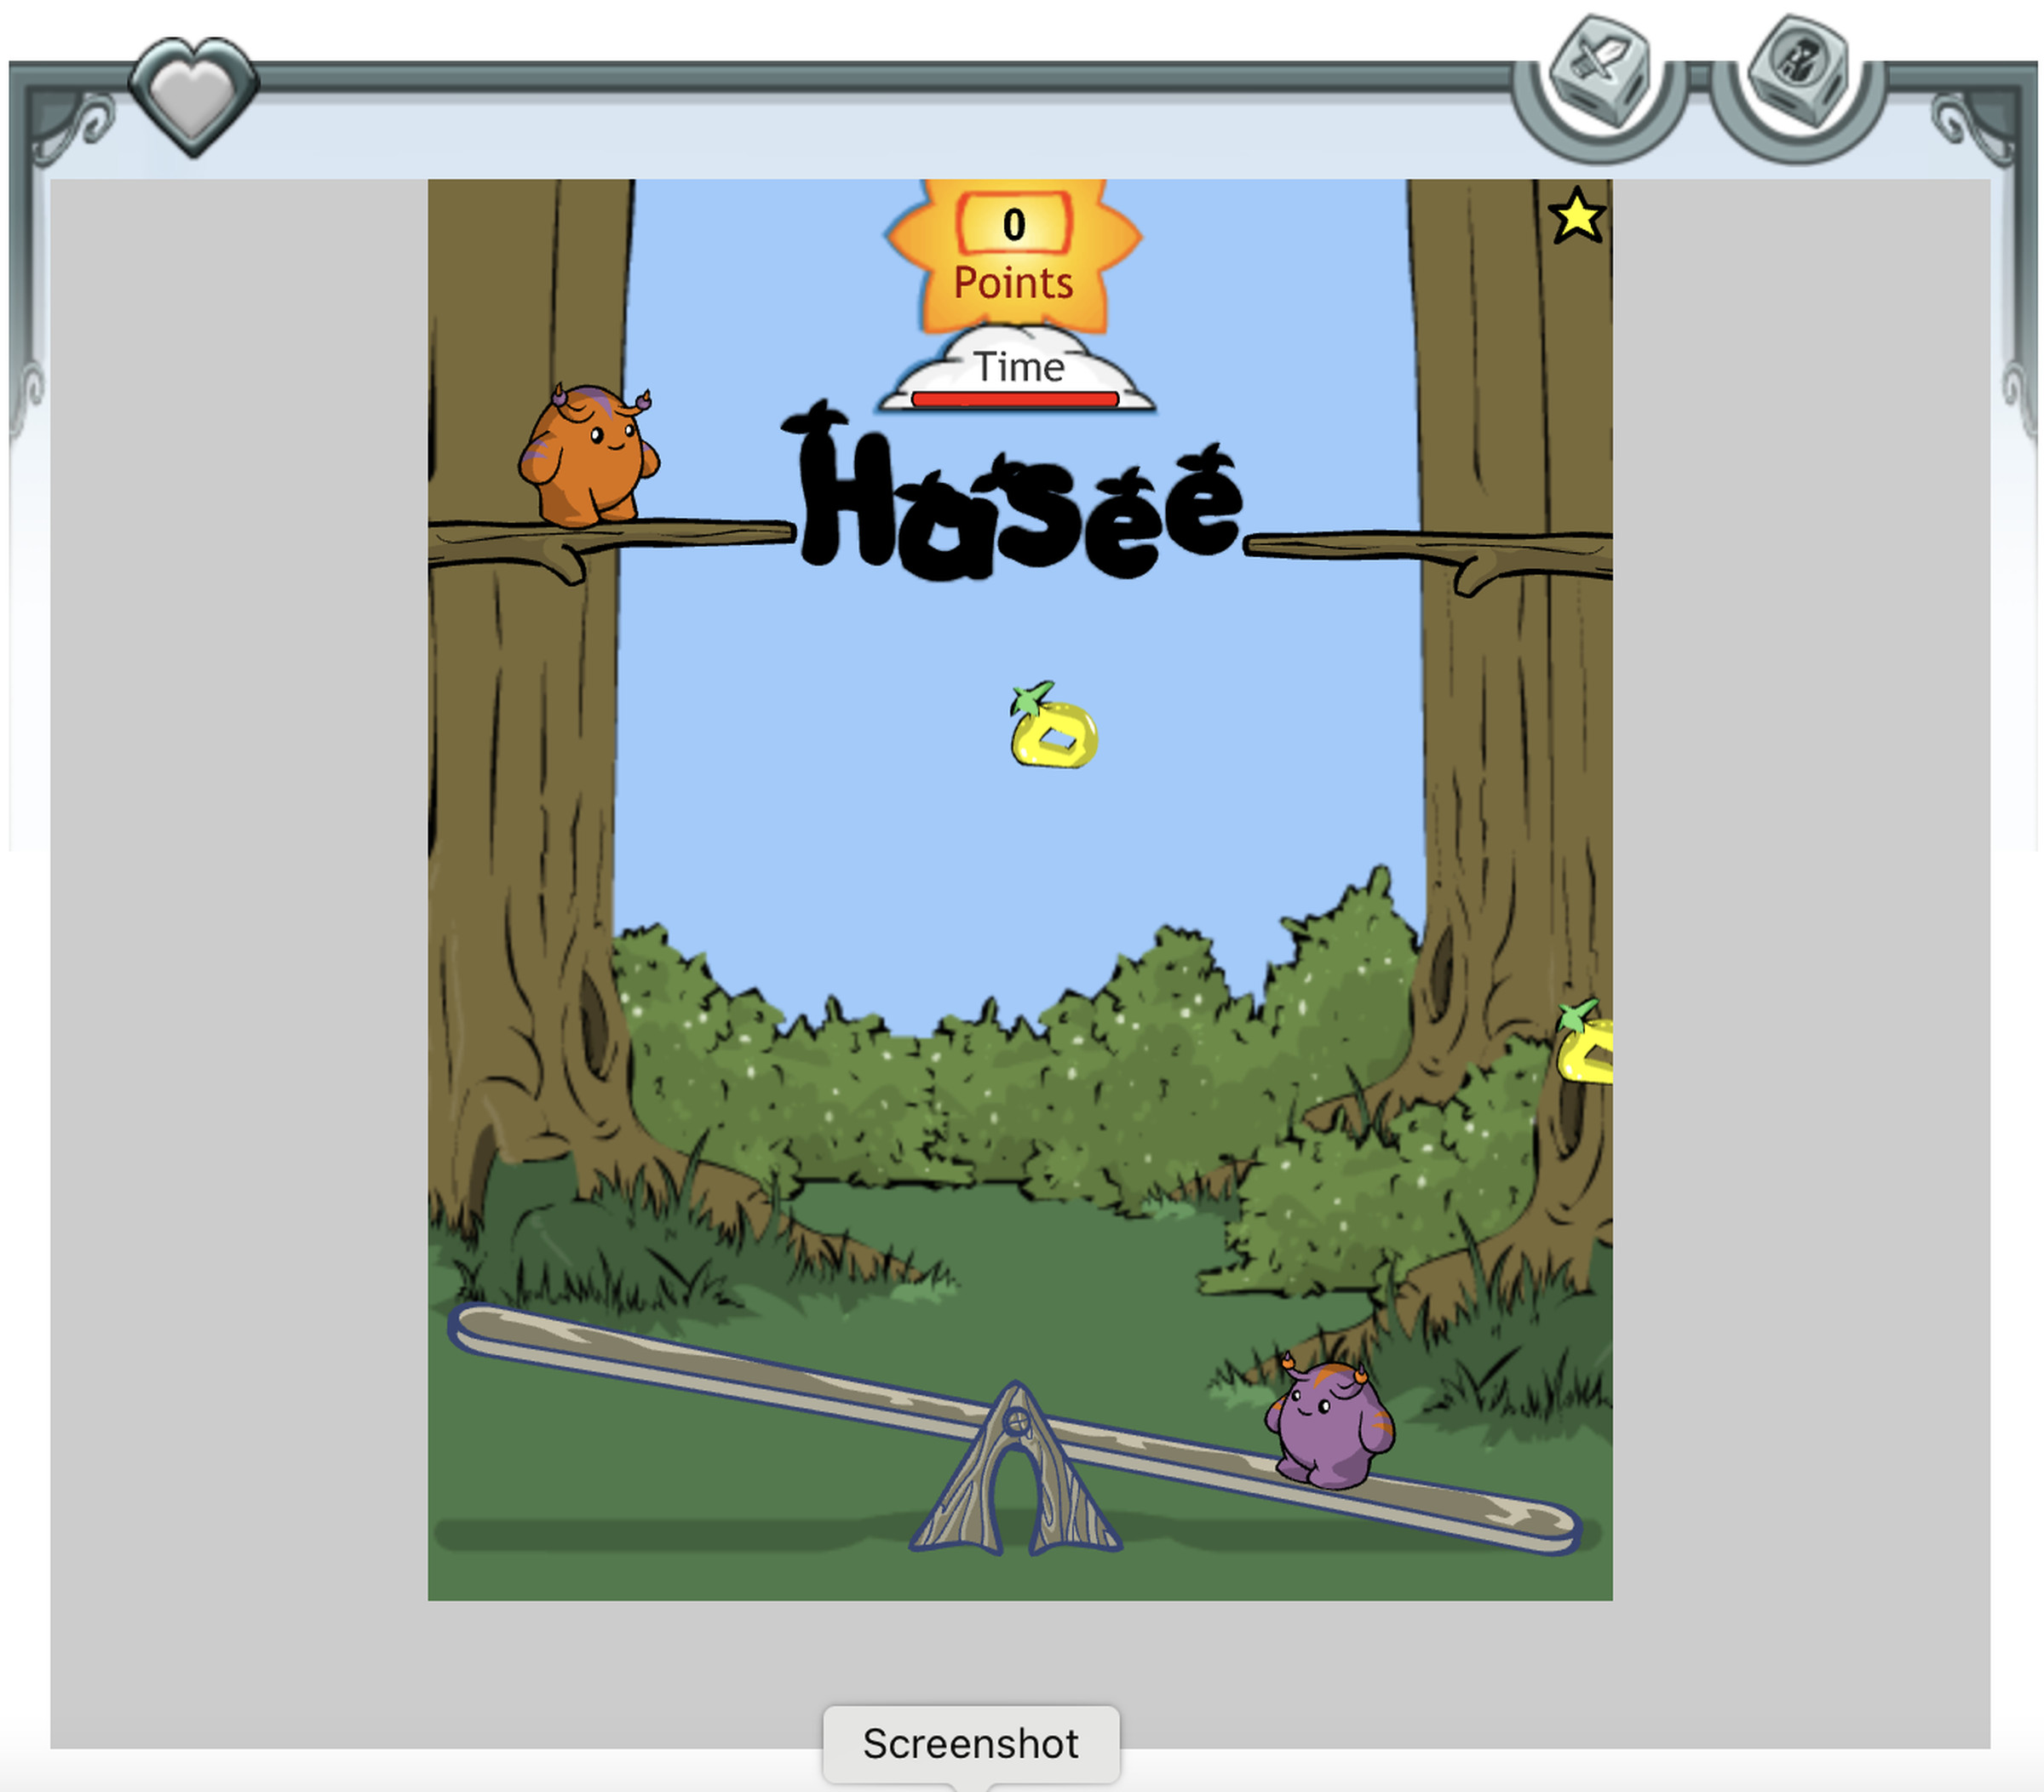 Screenshot from the neopets.com browser game Hasee Bounce featuring to short rotund creatures standing in a forest as colorful donut fruits scroll by.